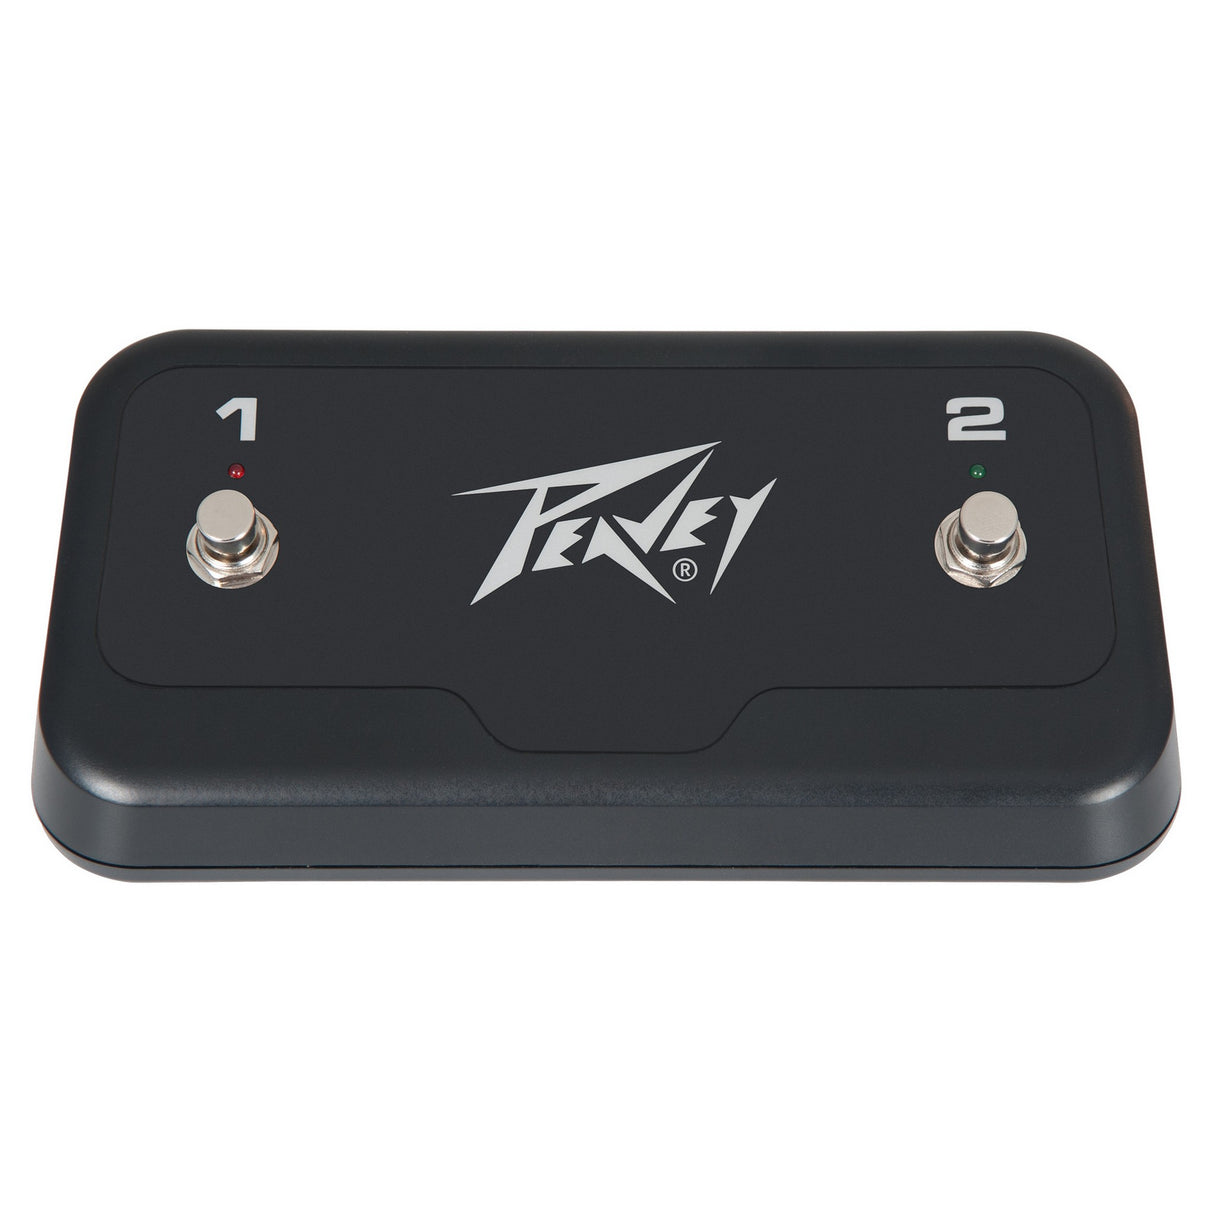 Peavey Multi-Purpose 2-Button Footswitch with LEDs